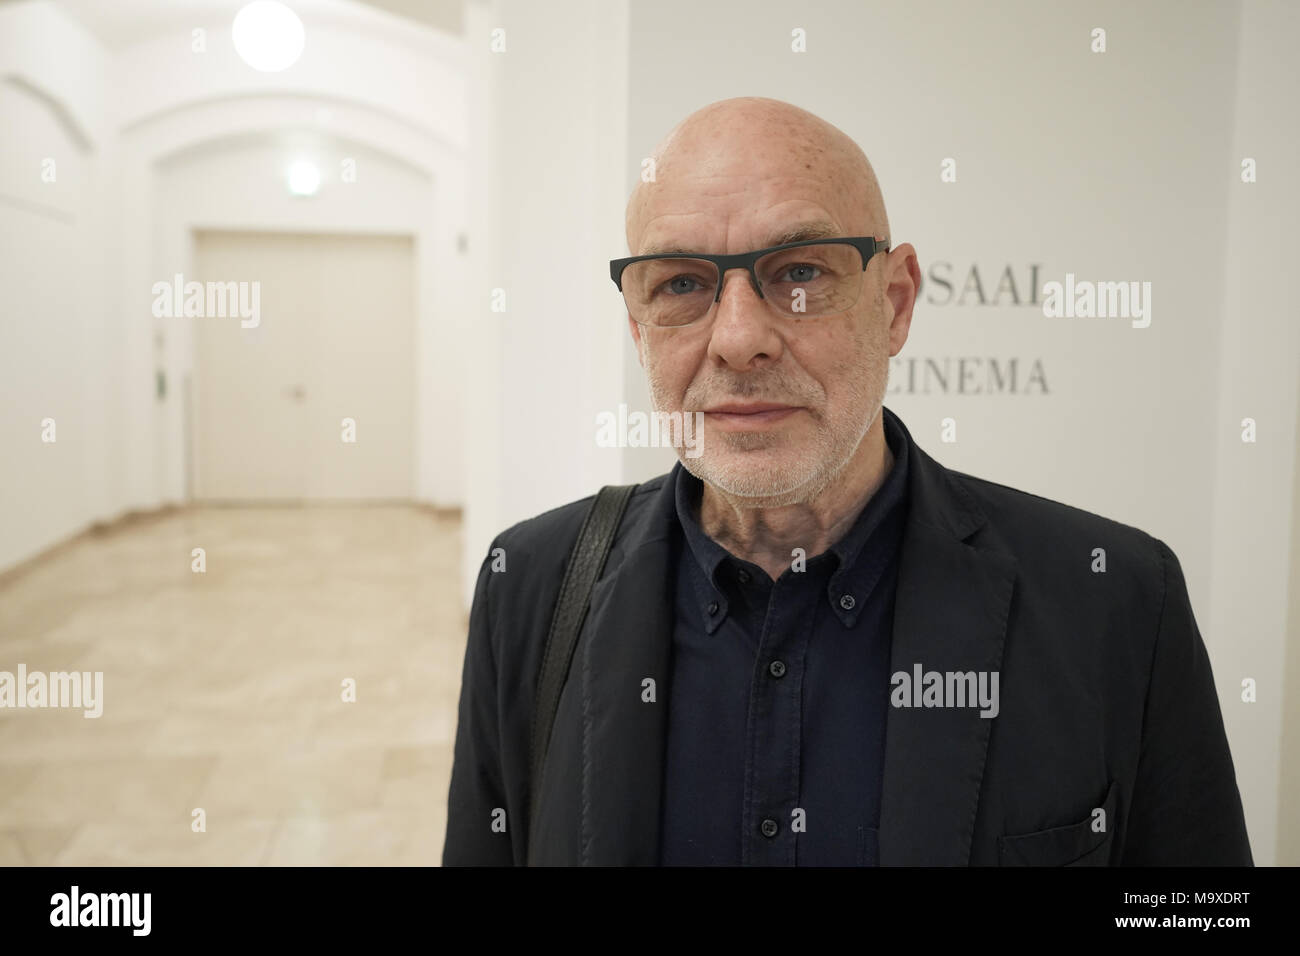 29 March 2018, Germany, Berlin: Musician and sound artist Brian Eno during the presentation of the installation 'Empty Formalism' in the Martin Gropius Building. The installation displays colourful and continuously changing surfaces on canvas while spherical sounds play. The work is part of the exhibition 'ISM Hexadome'. Photo: Jörg Carstensen/dpa Stock Photo